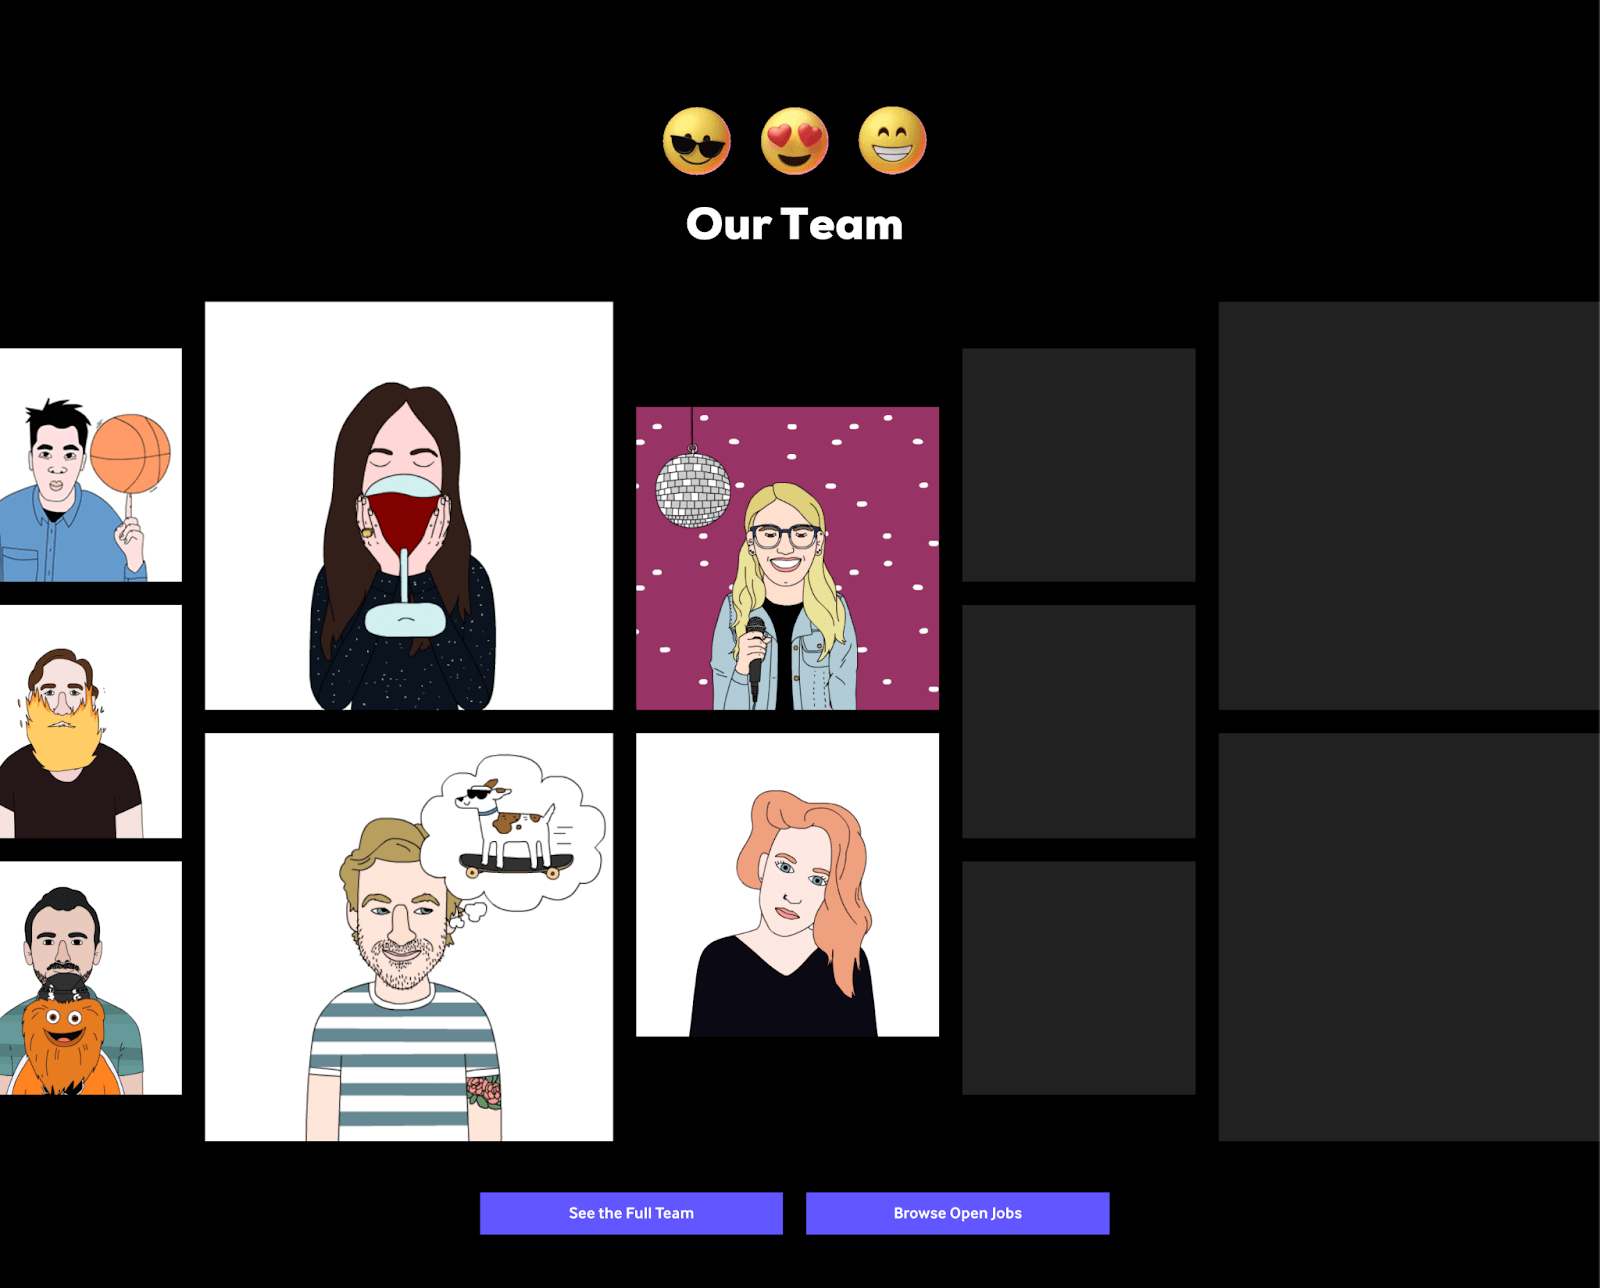 Giphy's team page, featuring cartoon gifs of each employee